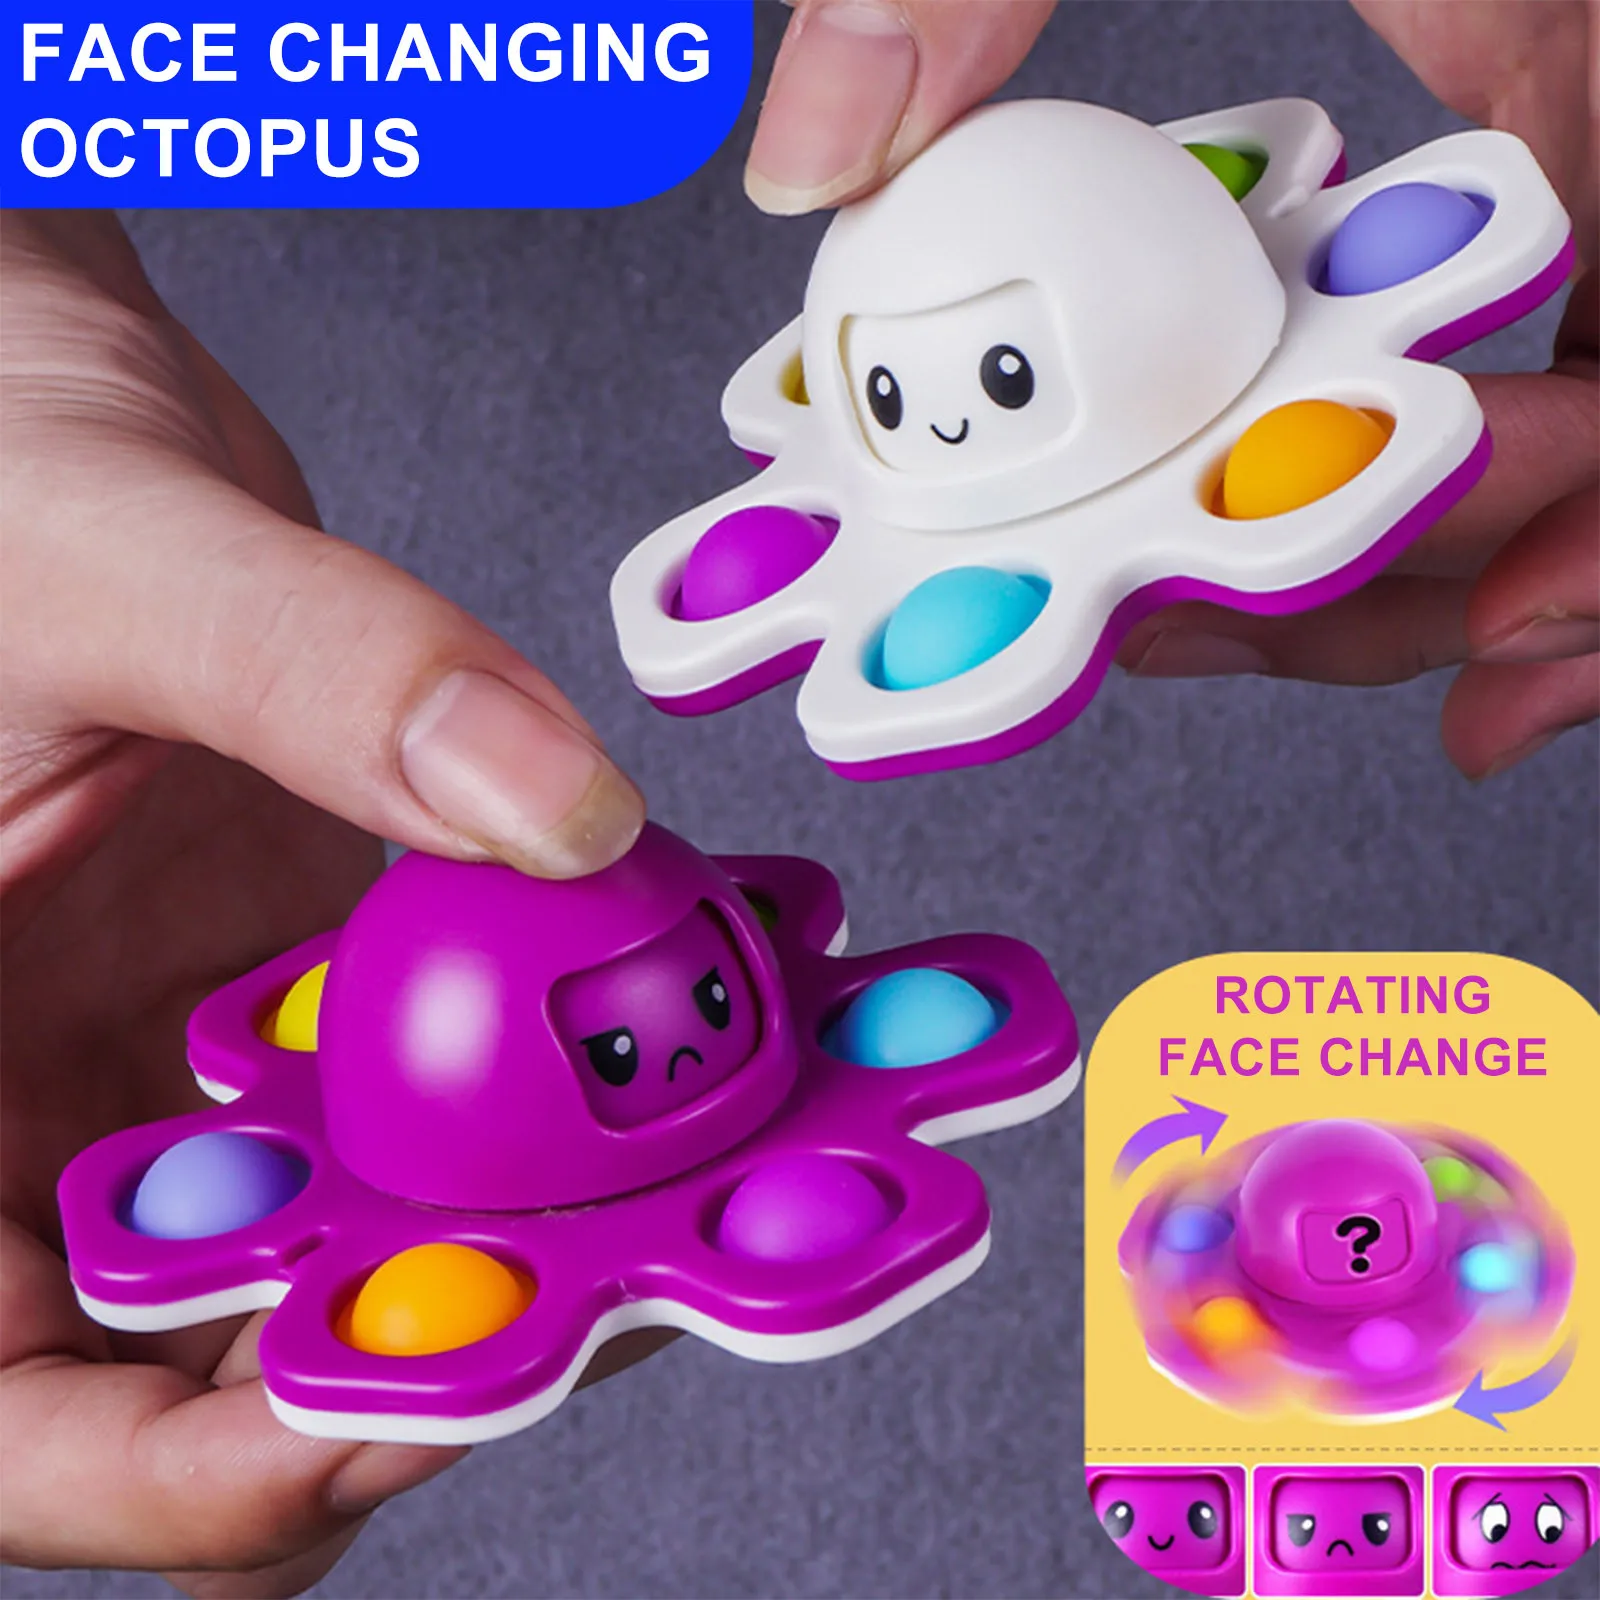 

New Fidget Toy Face-Changing Octopus Push Bubble Fingertip Gyro Spinner Sensory Stress Relief Adult Kid Autism Anti-Stress Toy